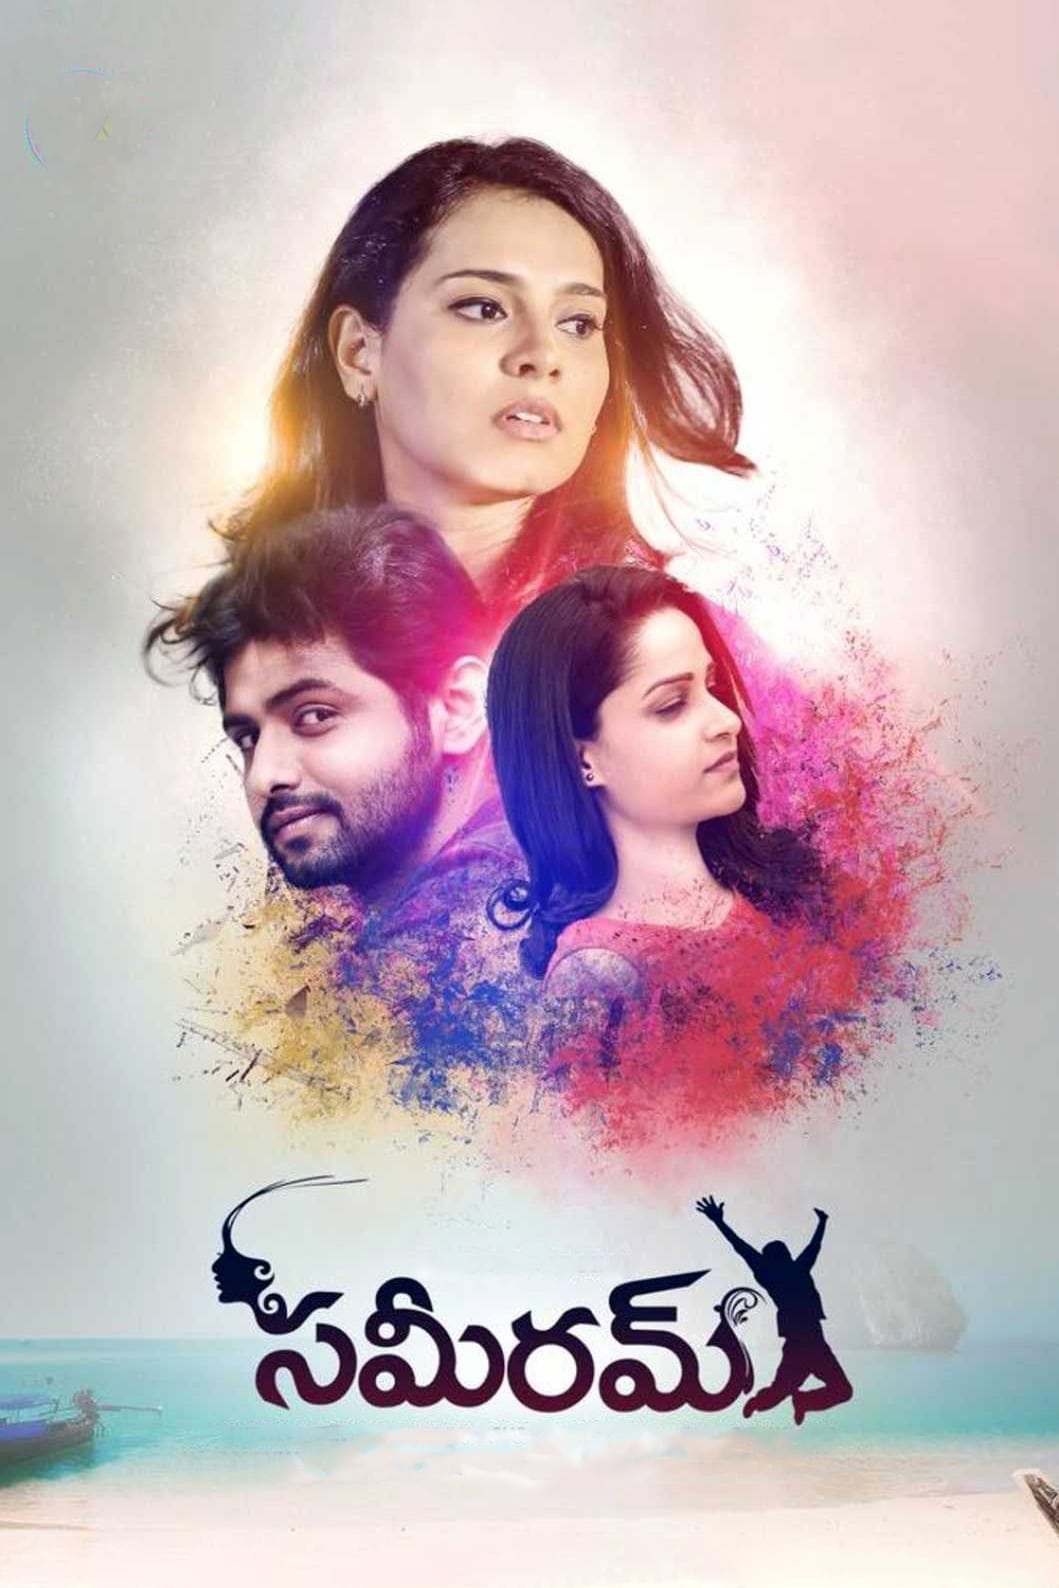 Poster for the movie "Sameeram"